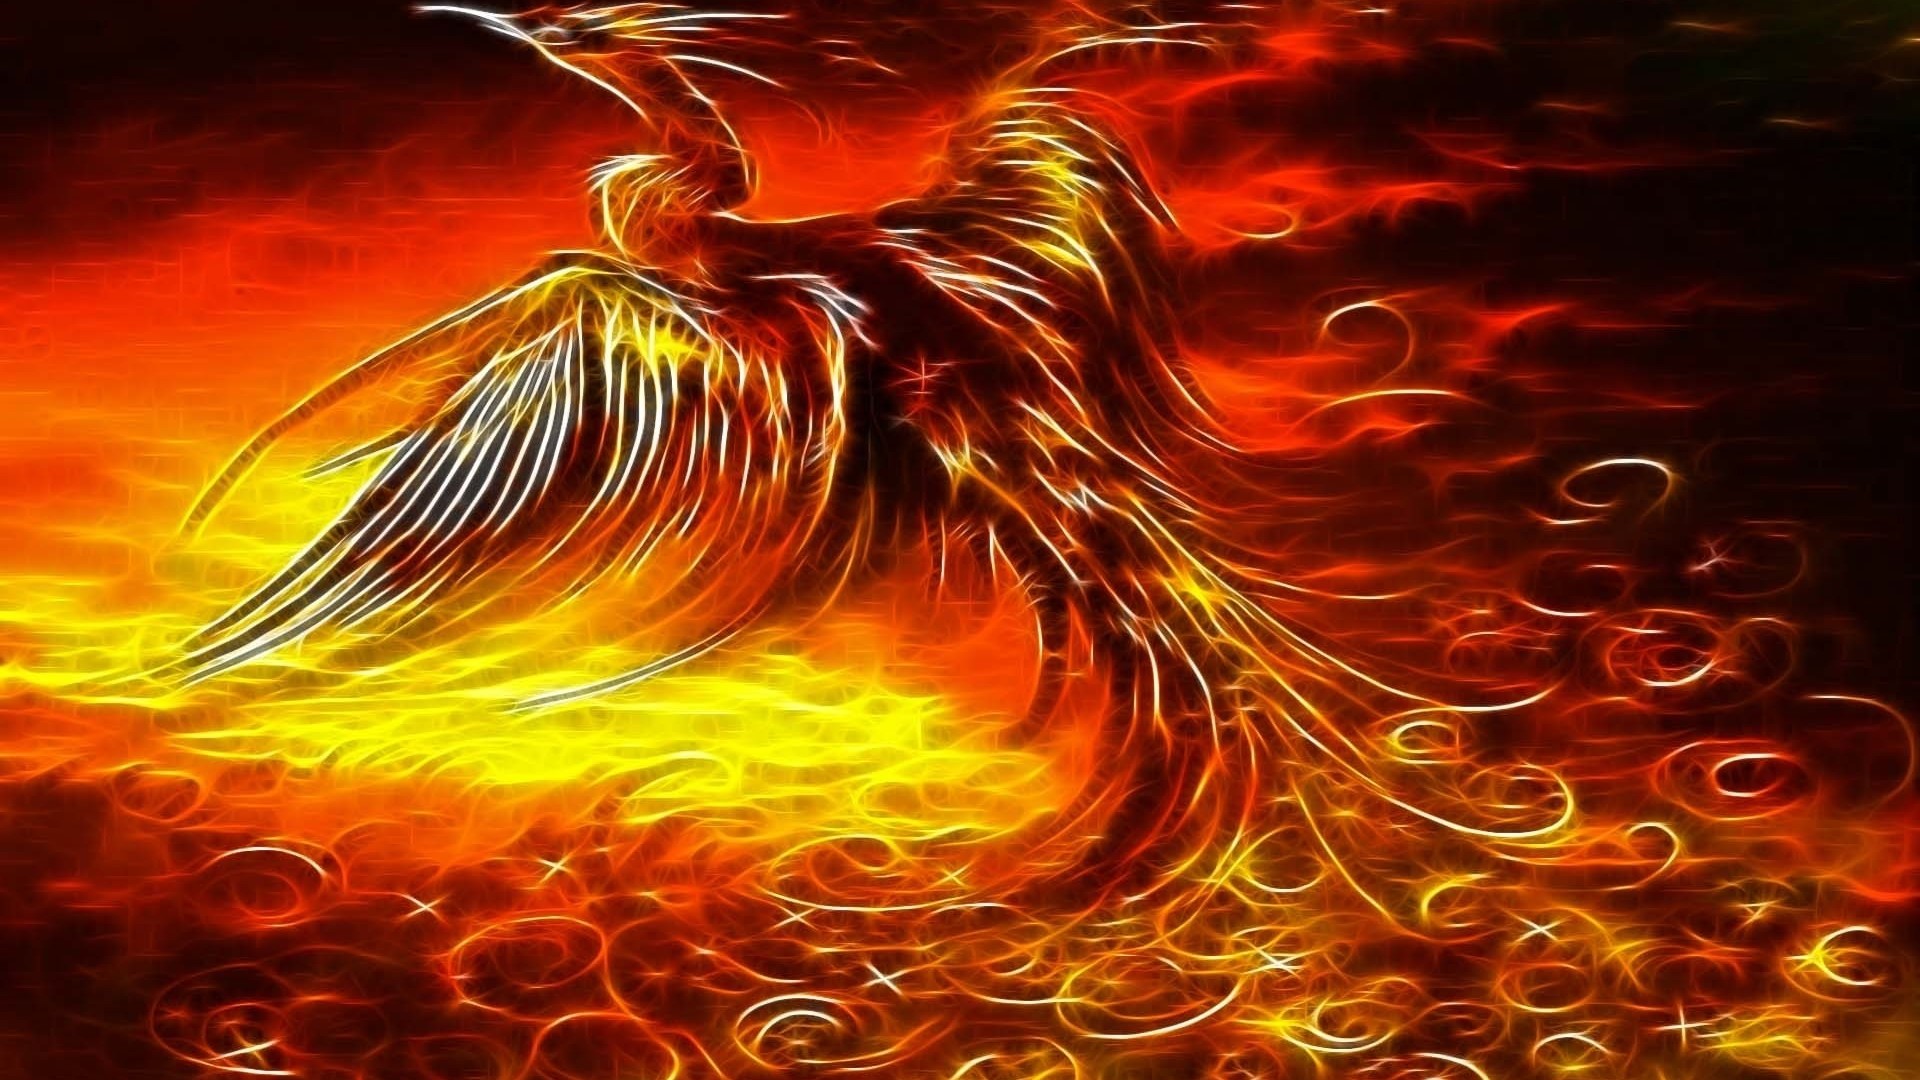 Phoenix Wallpaper with image resolution 1920x1080 pixel. You can use this wallpaper as background for your desktop Computer Screensavers, Android or iPhone smartphones